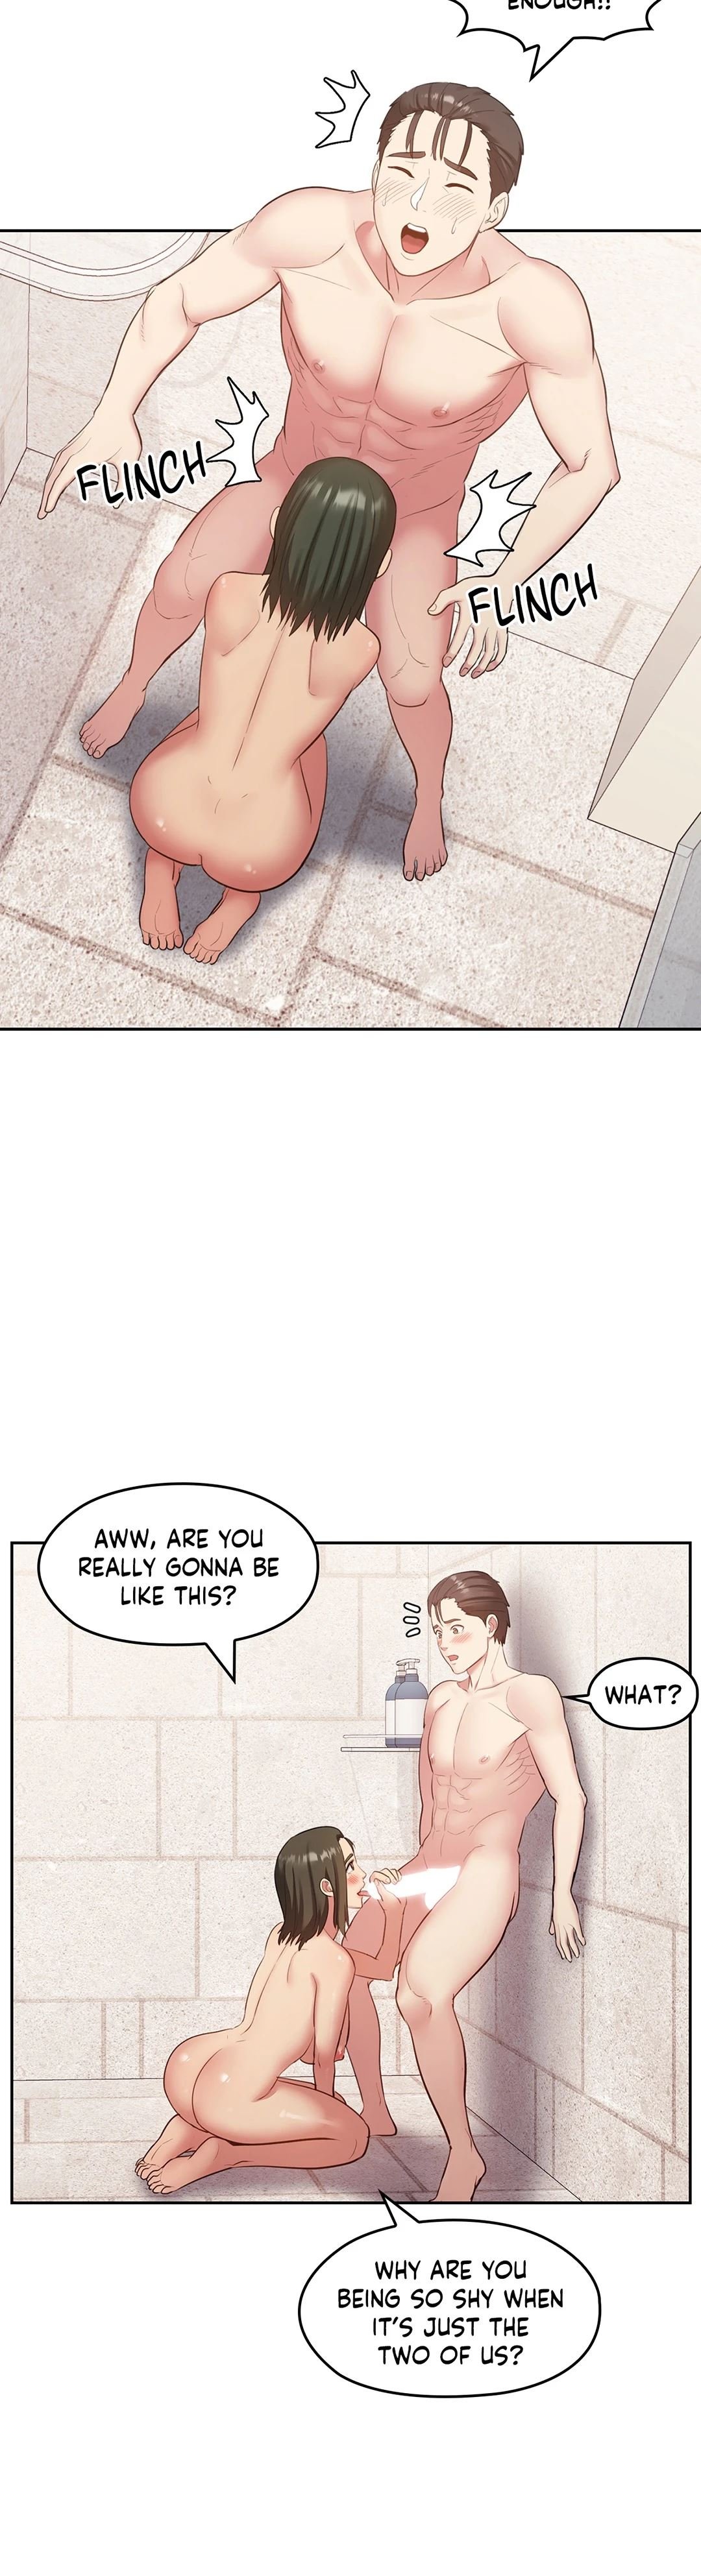 sexual-consulting-chap-38-19